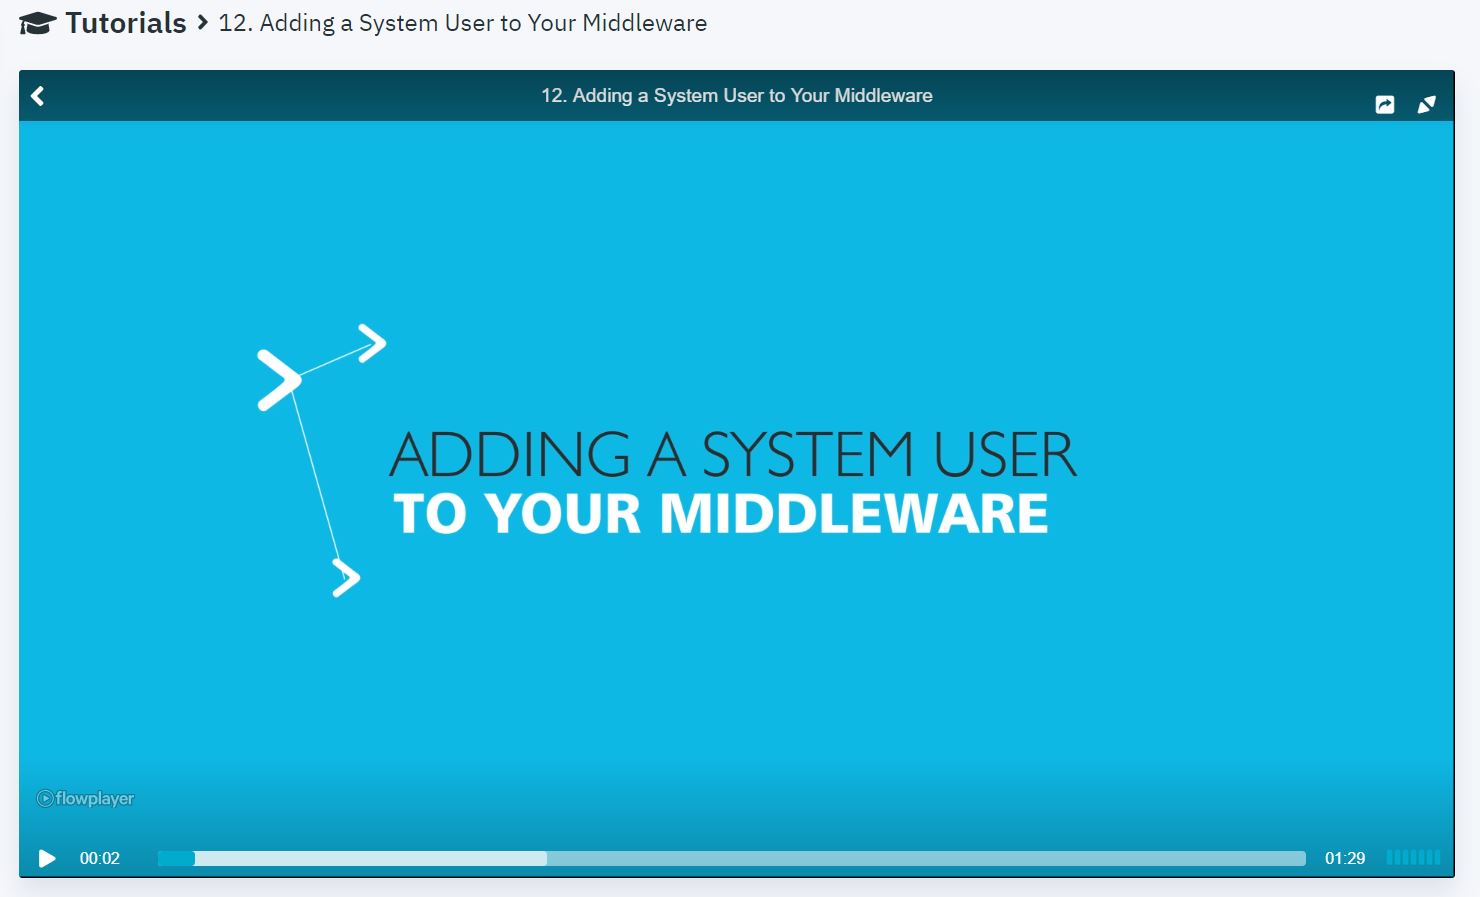 Adding a System User to your IPTV Middleware